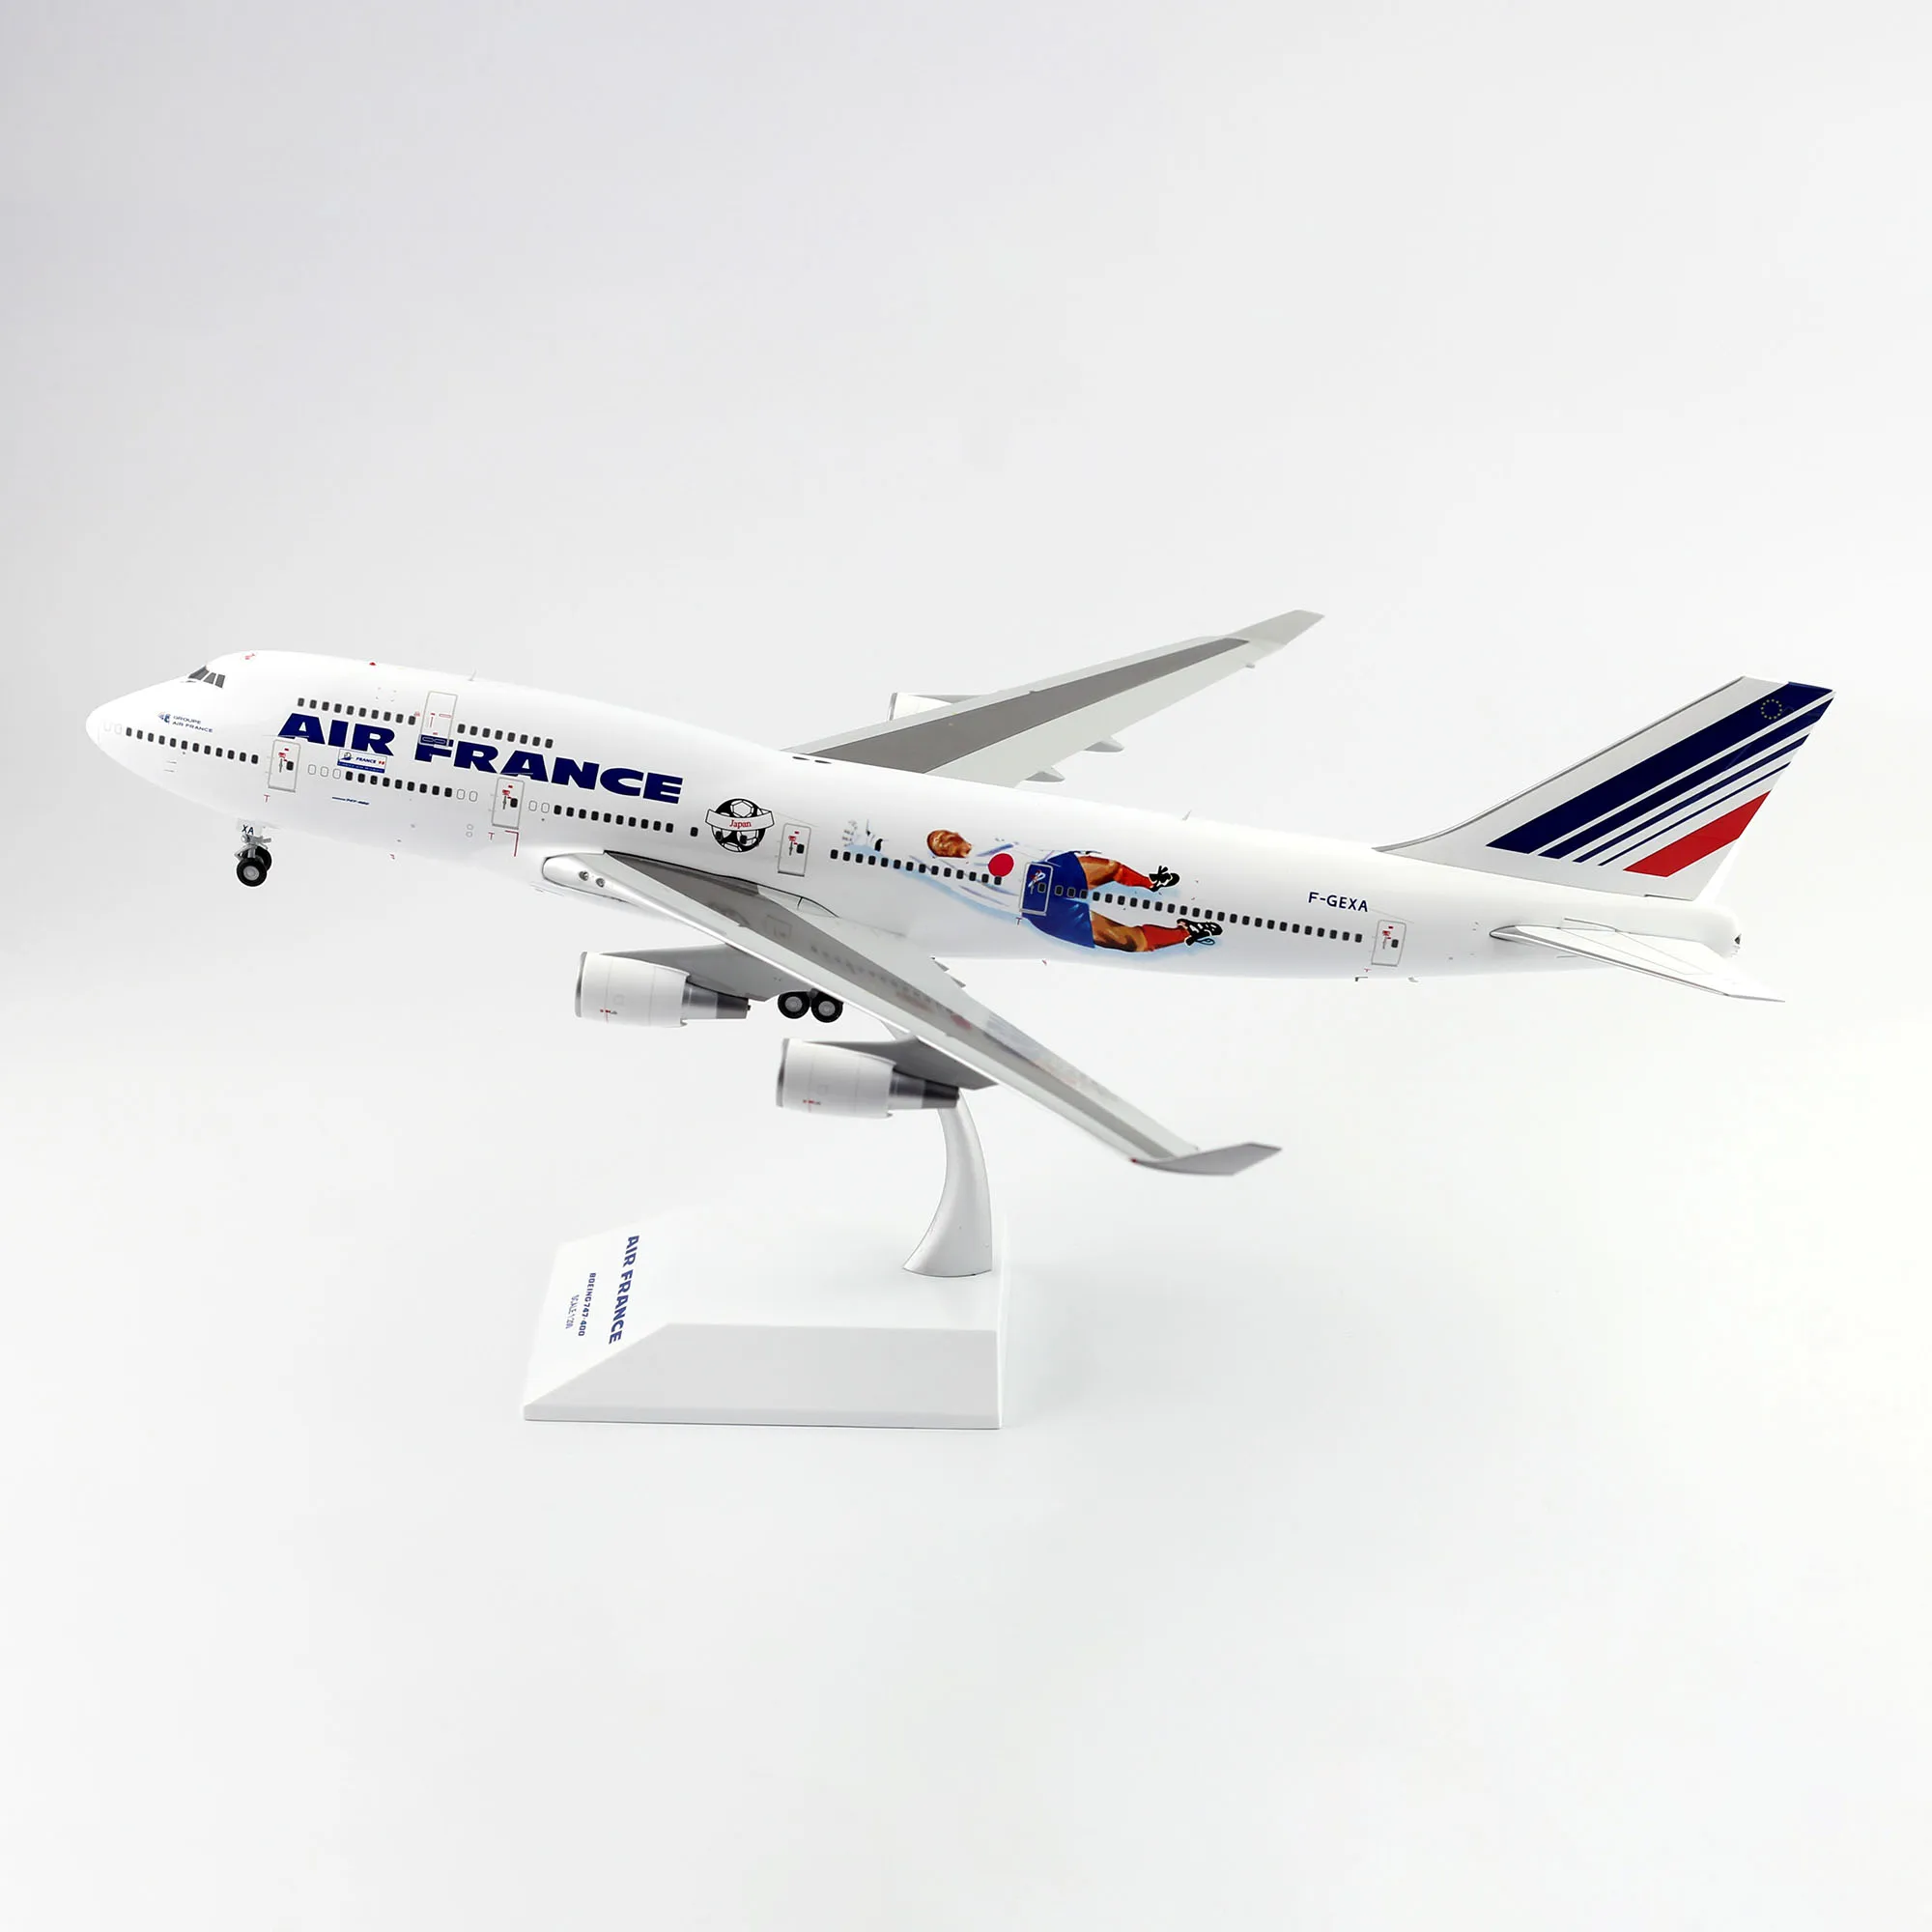 

Air France B747-400 Civil Aviation Airliner Alloy & Plastic Model 1:200 Scale Diecast Toy Gift Collection Simulation Display